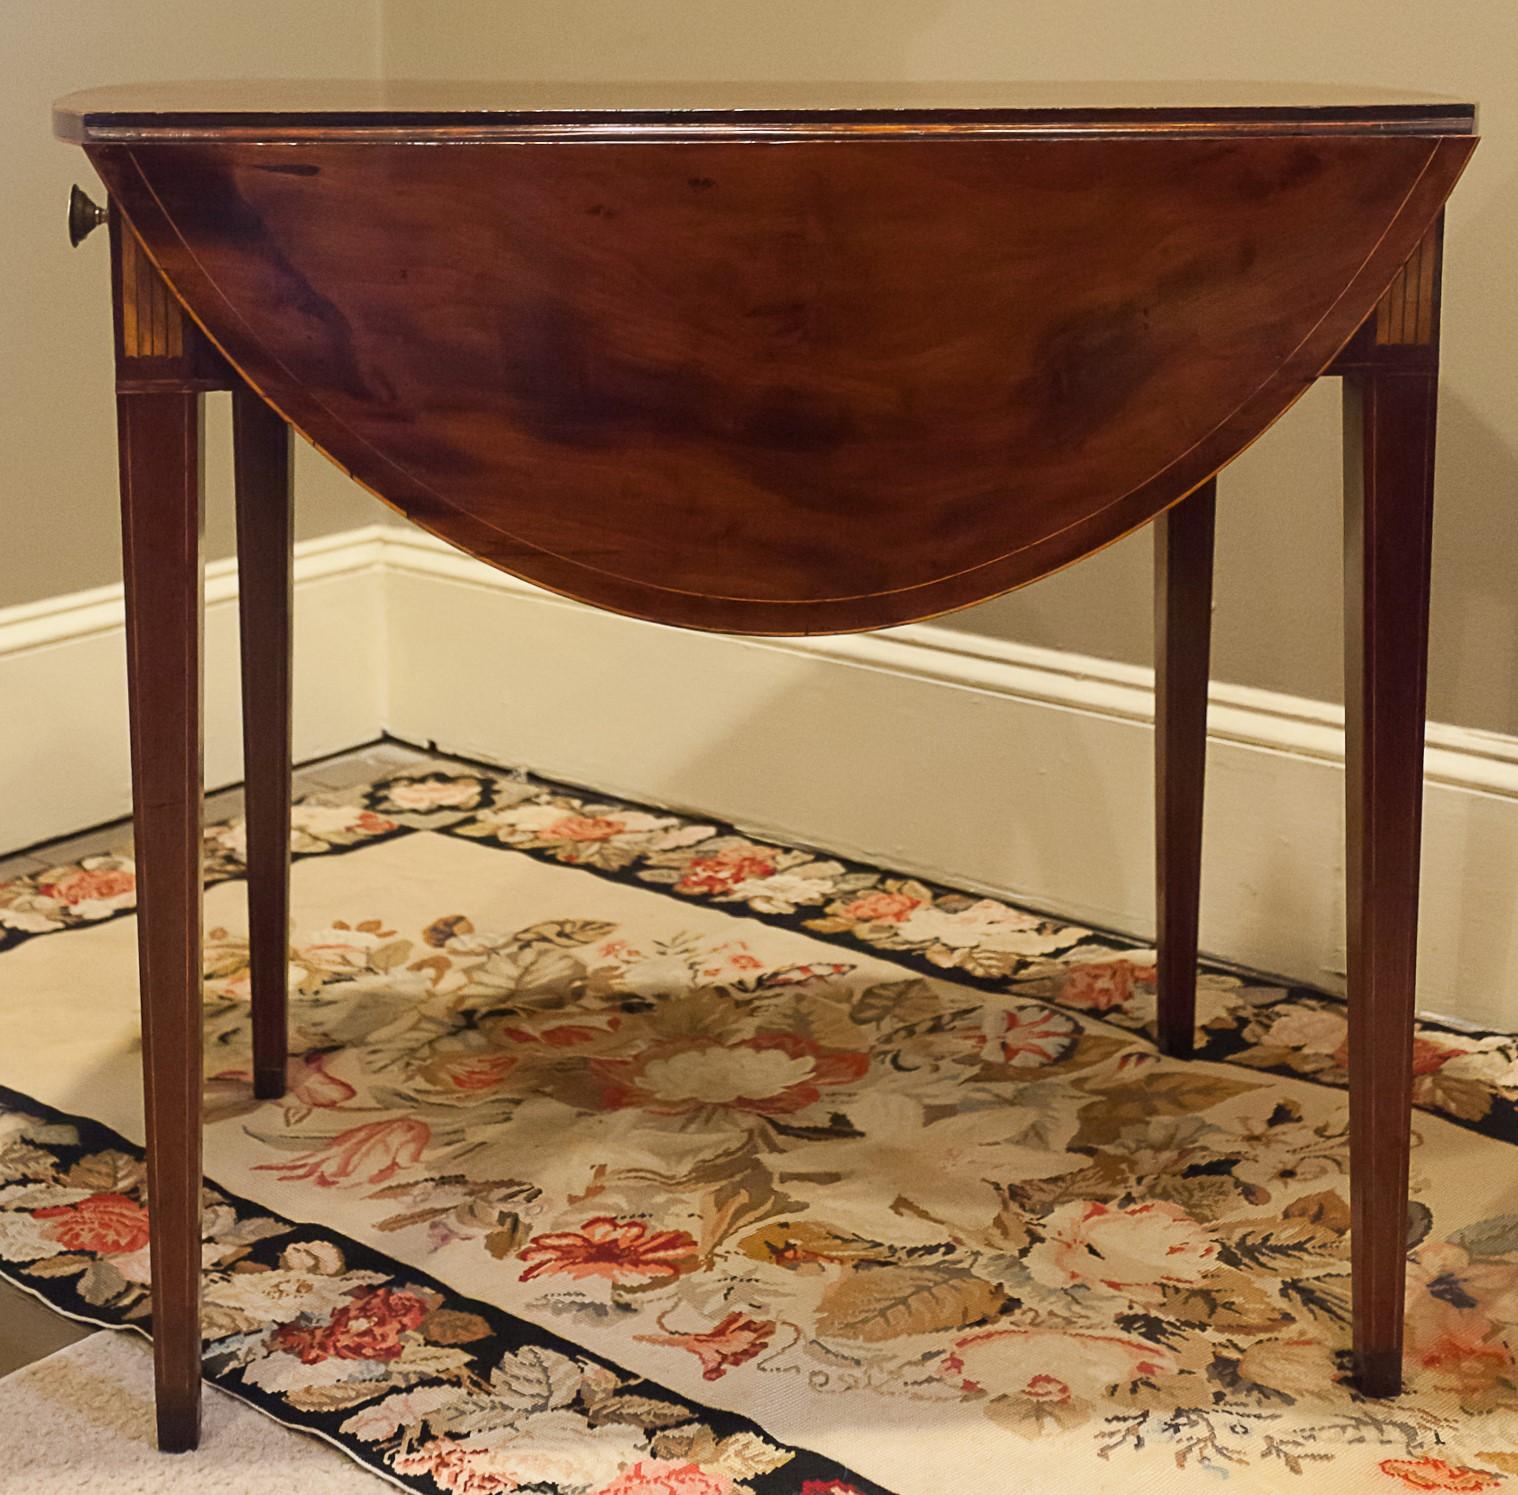 19th Century Federal Satinwood Inlaid Mahogany Oval Pembroke Table, New York, circa 1800 For Sale